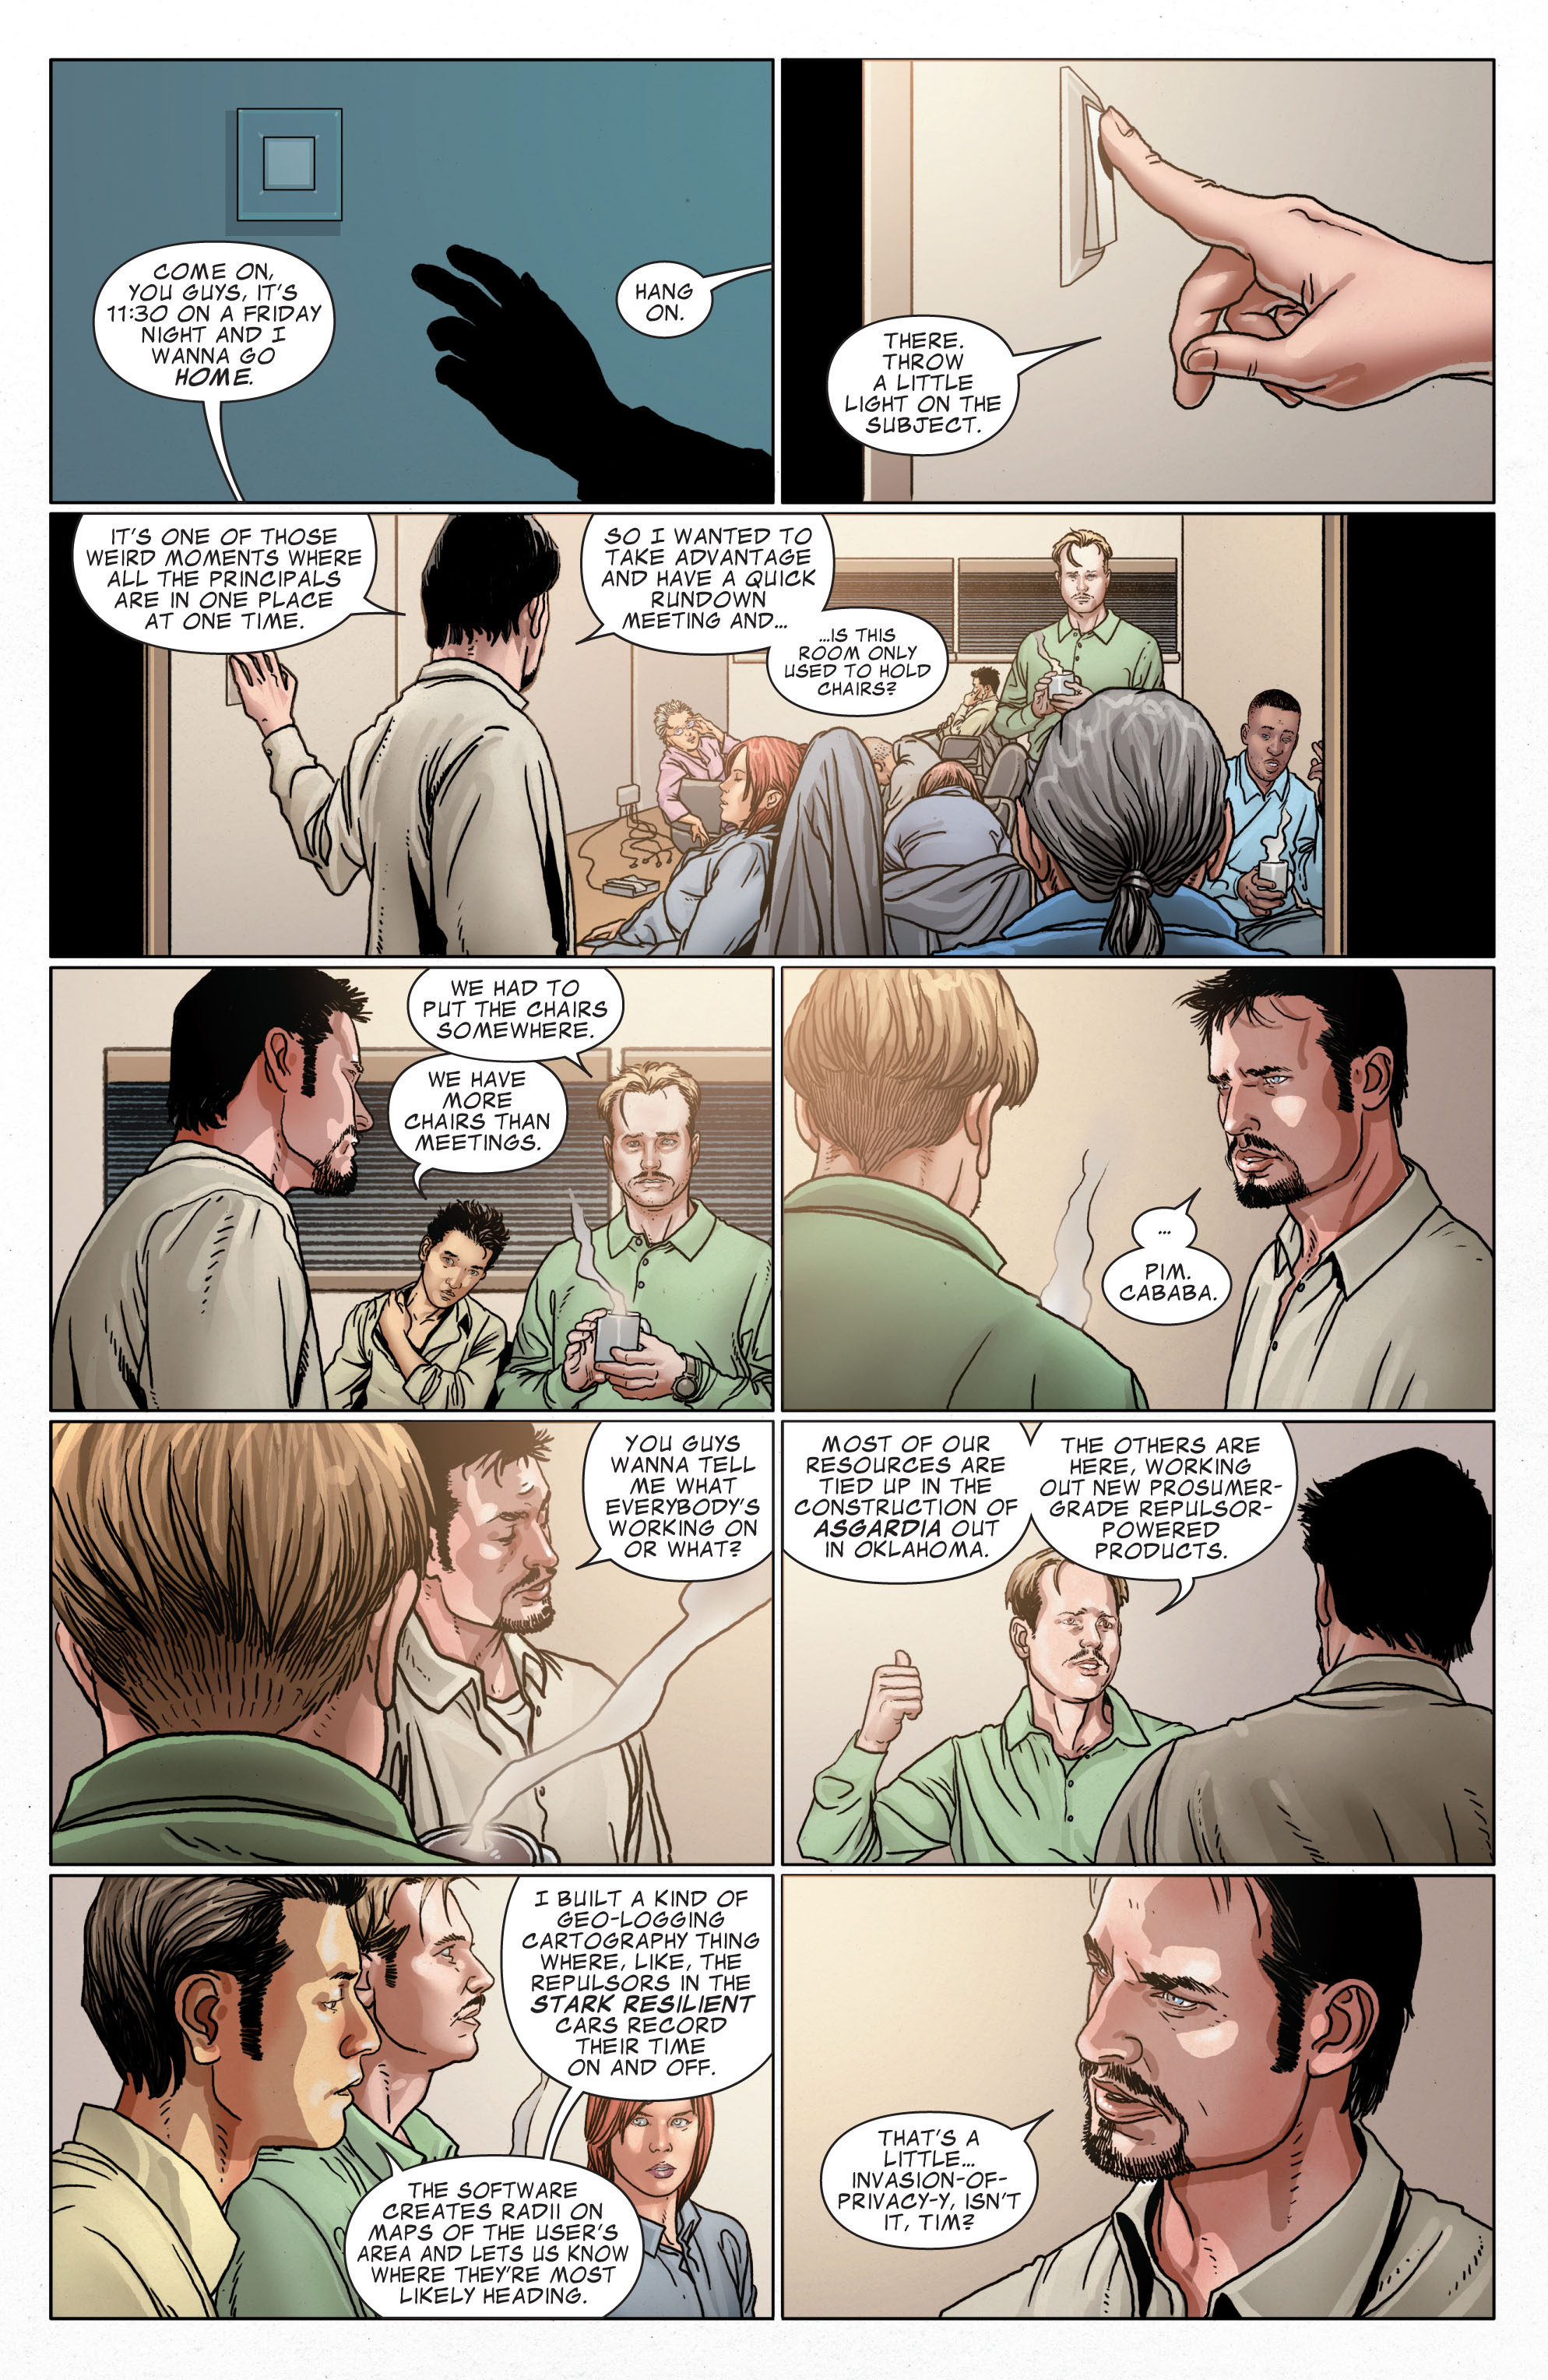 Invincible Iron Man (2008) 511 Page 2